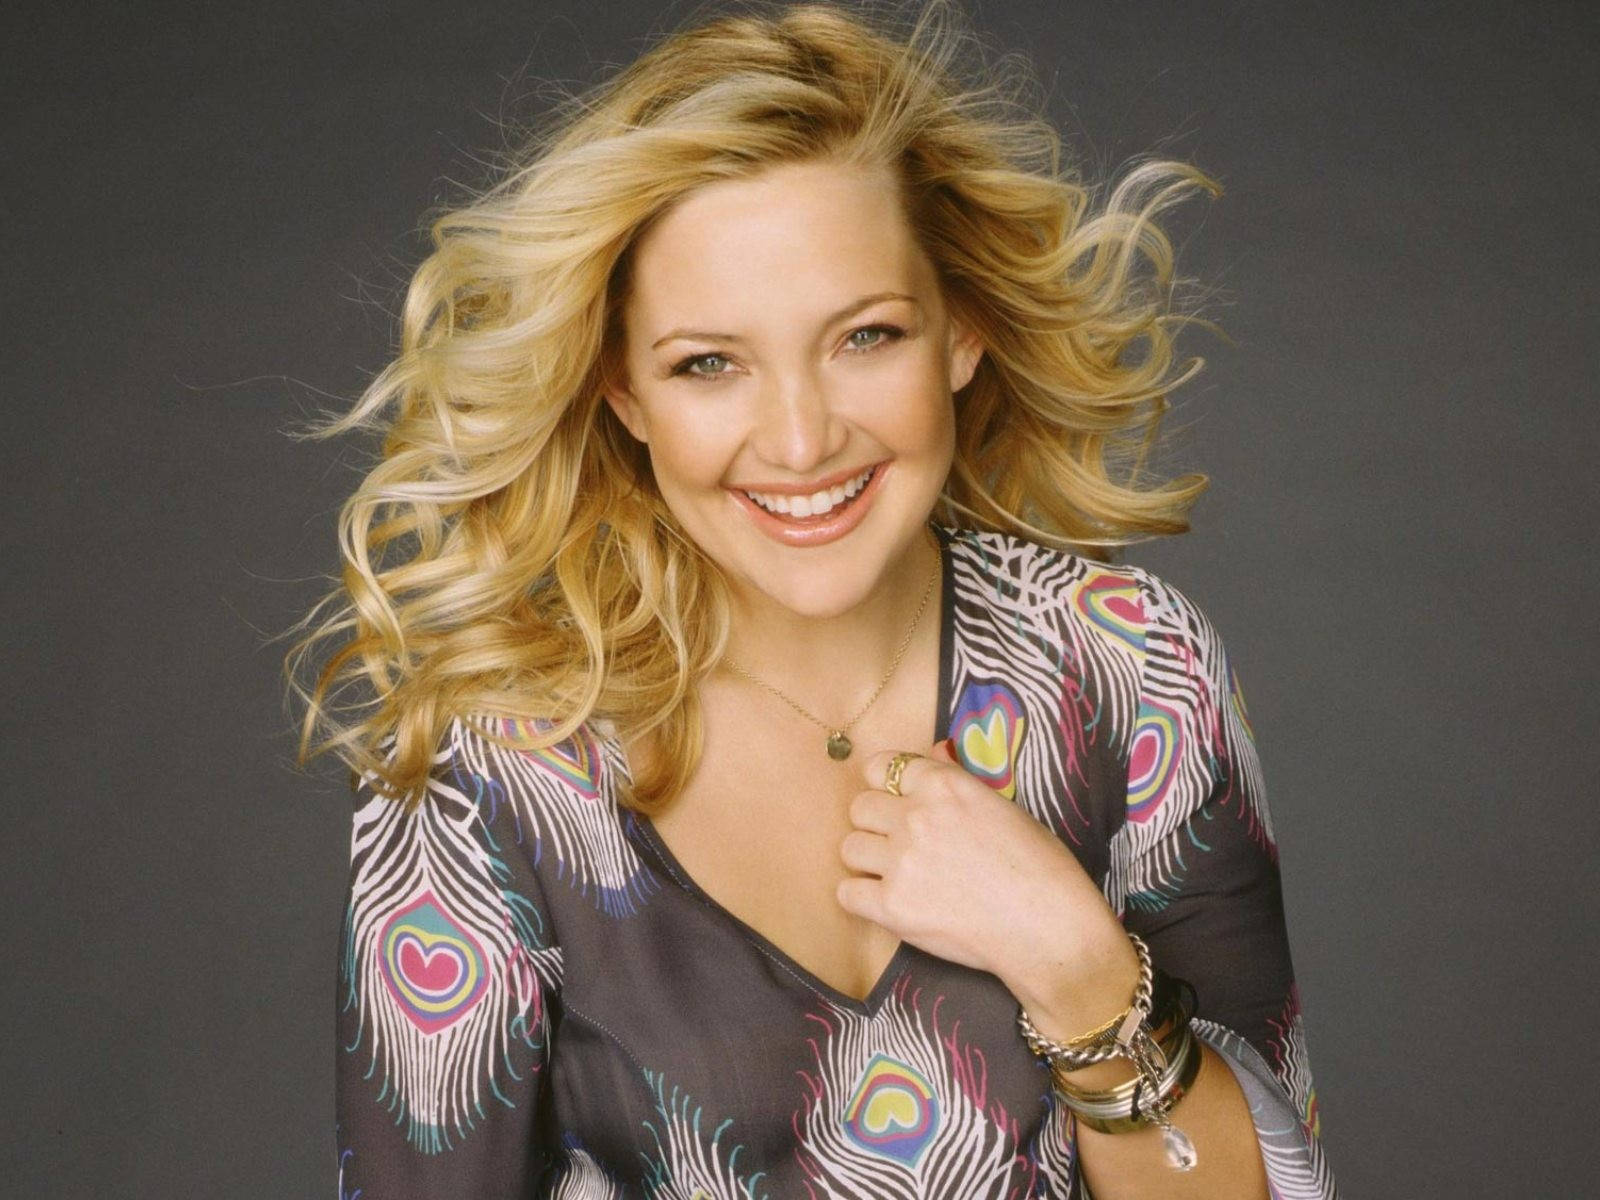 A Captivating Image Of American Celebrity Kate Hudson Splendidly Smiling At The Camera Inside The Studio